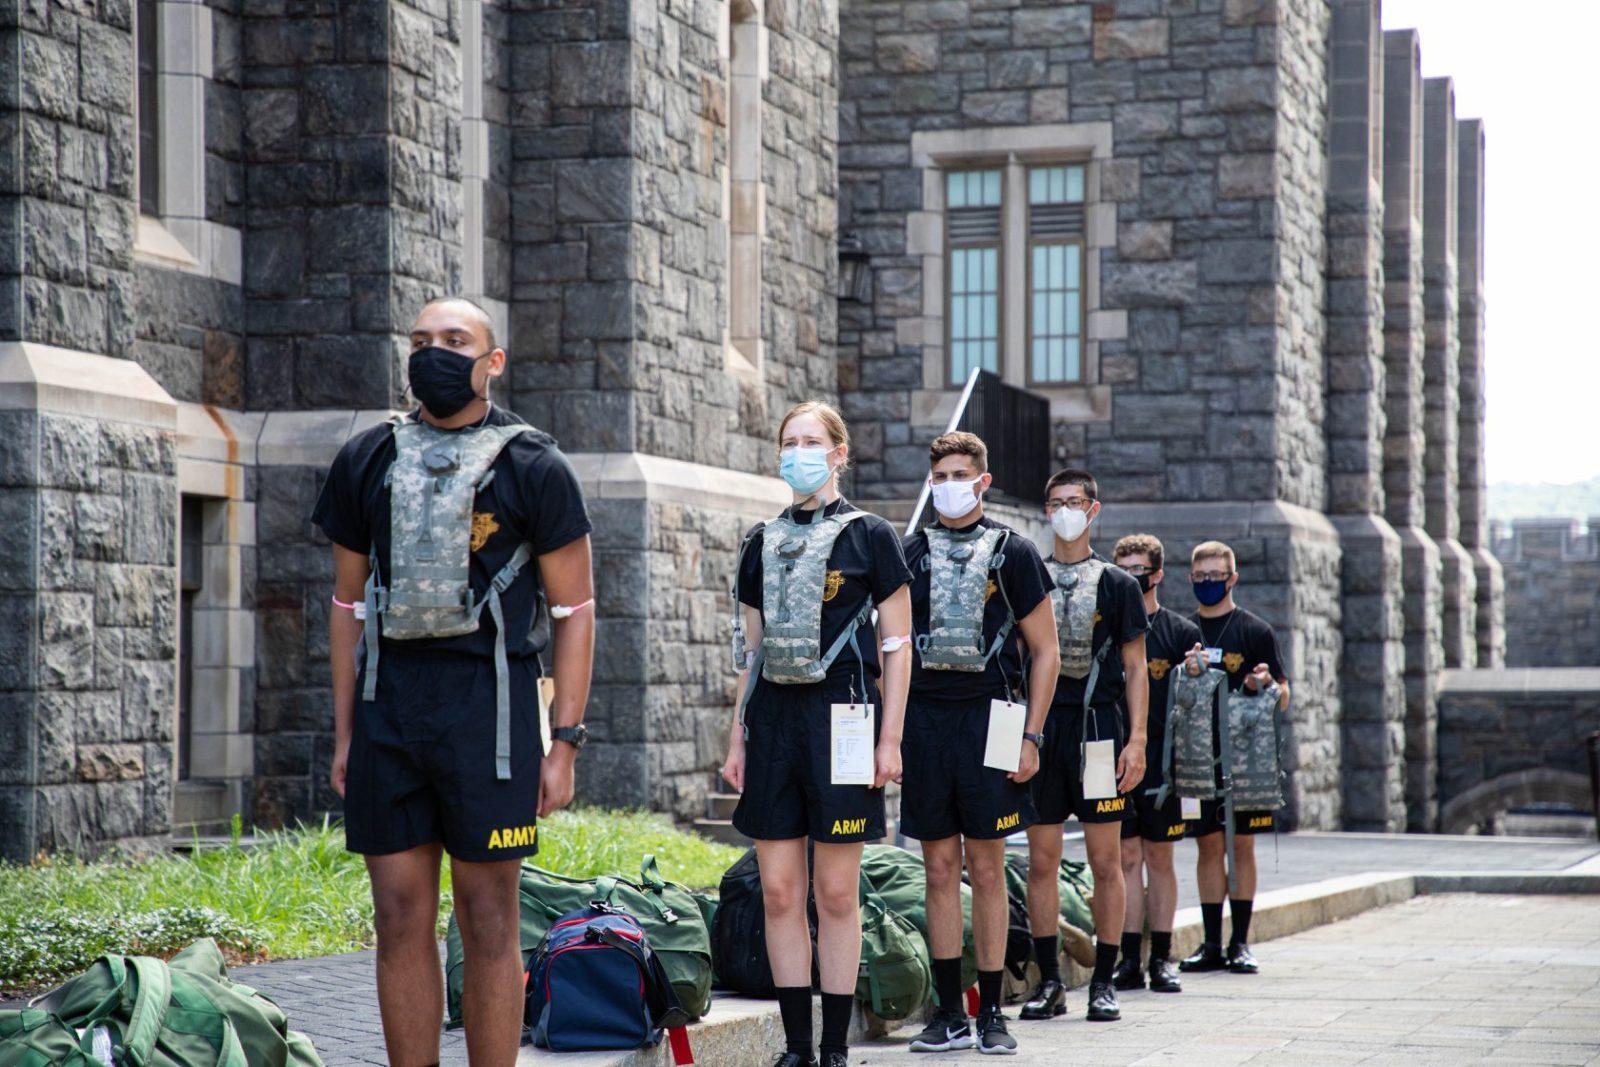 R-Day at West Point restructured - Mid Hudson News